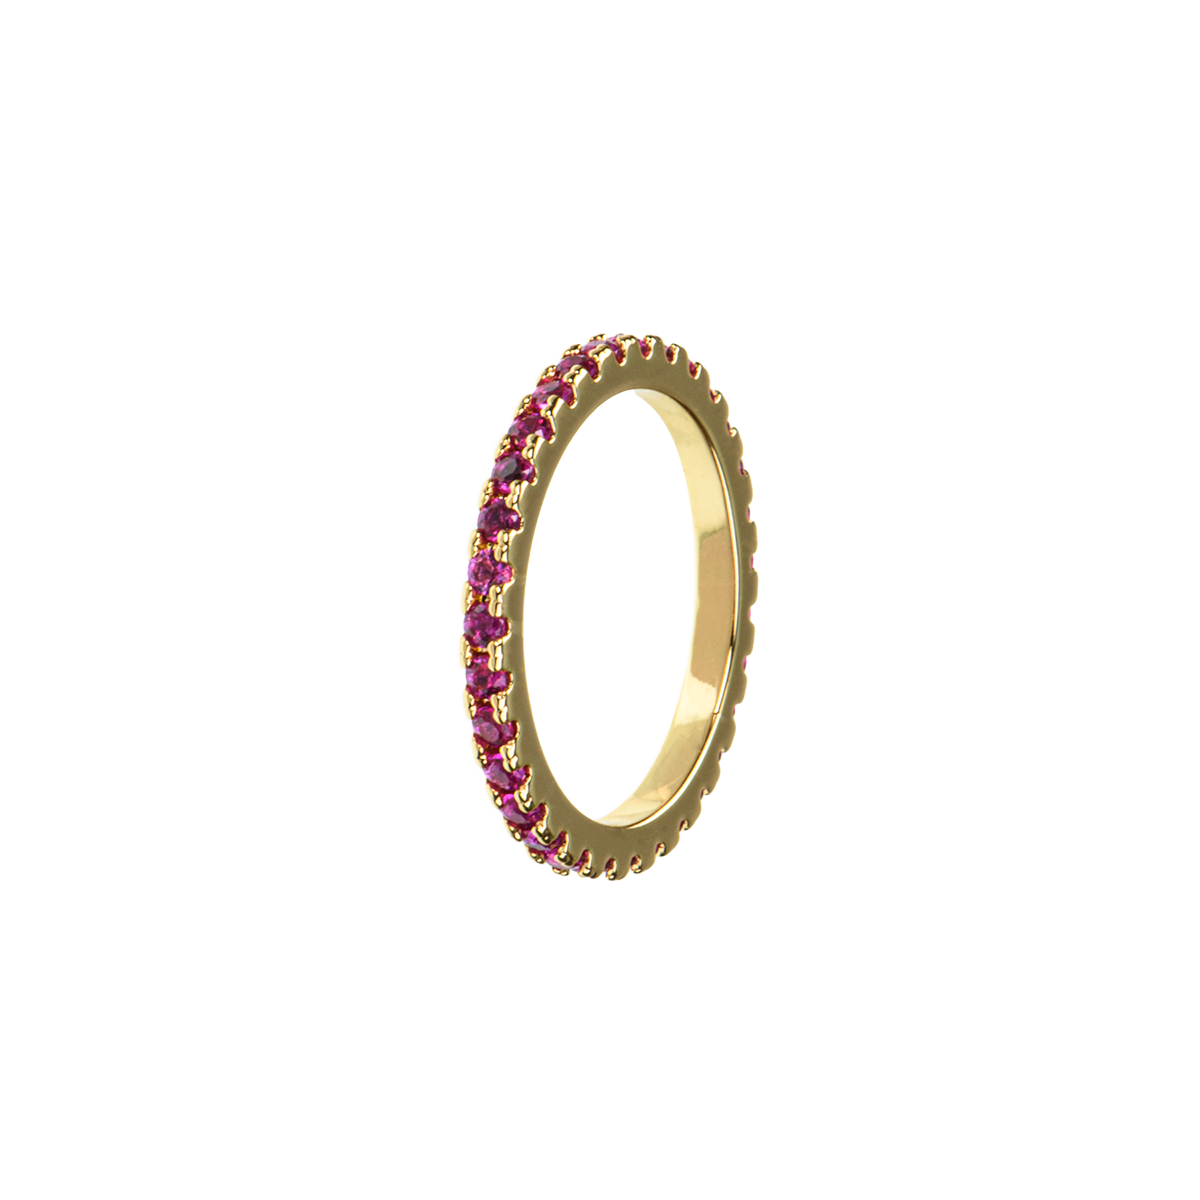 Image of Ring Cerise 54mm from Emilia by Bon Dep